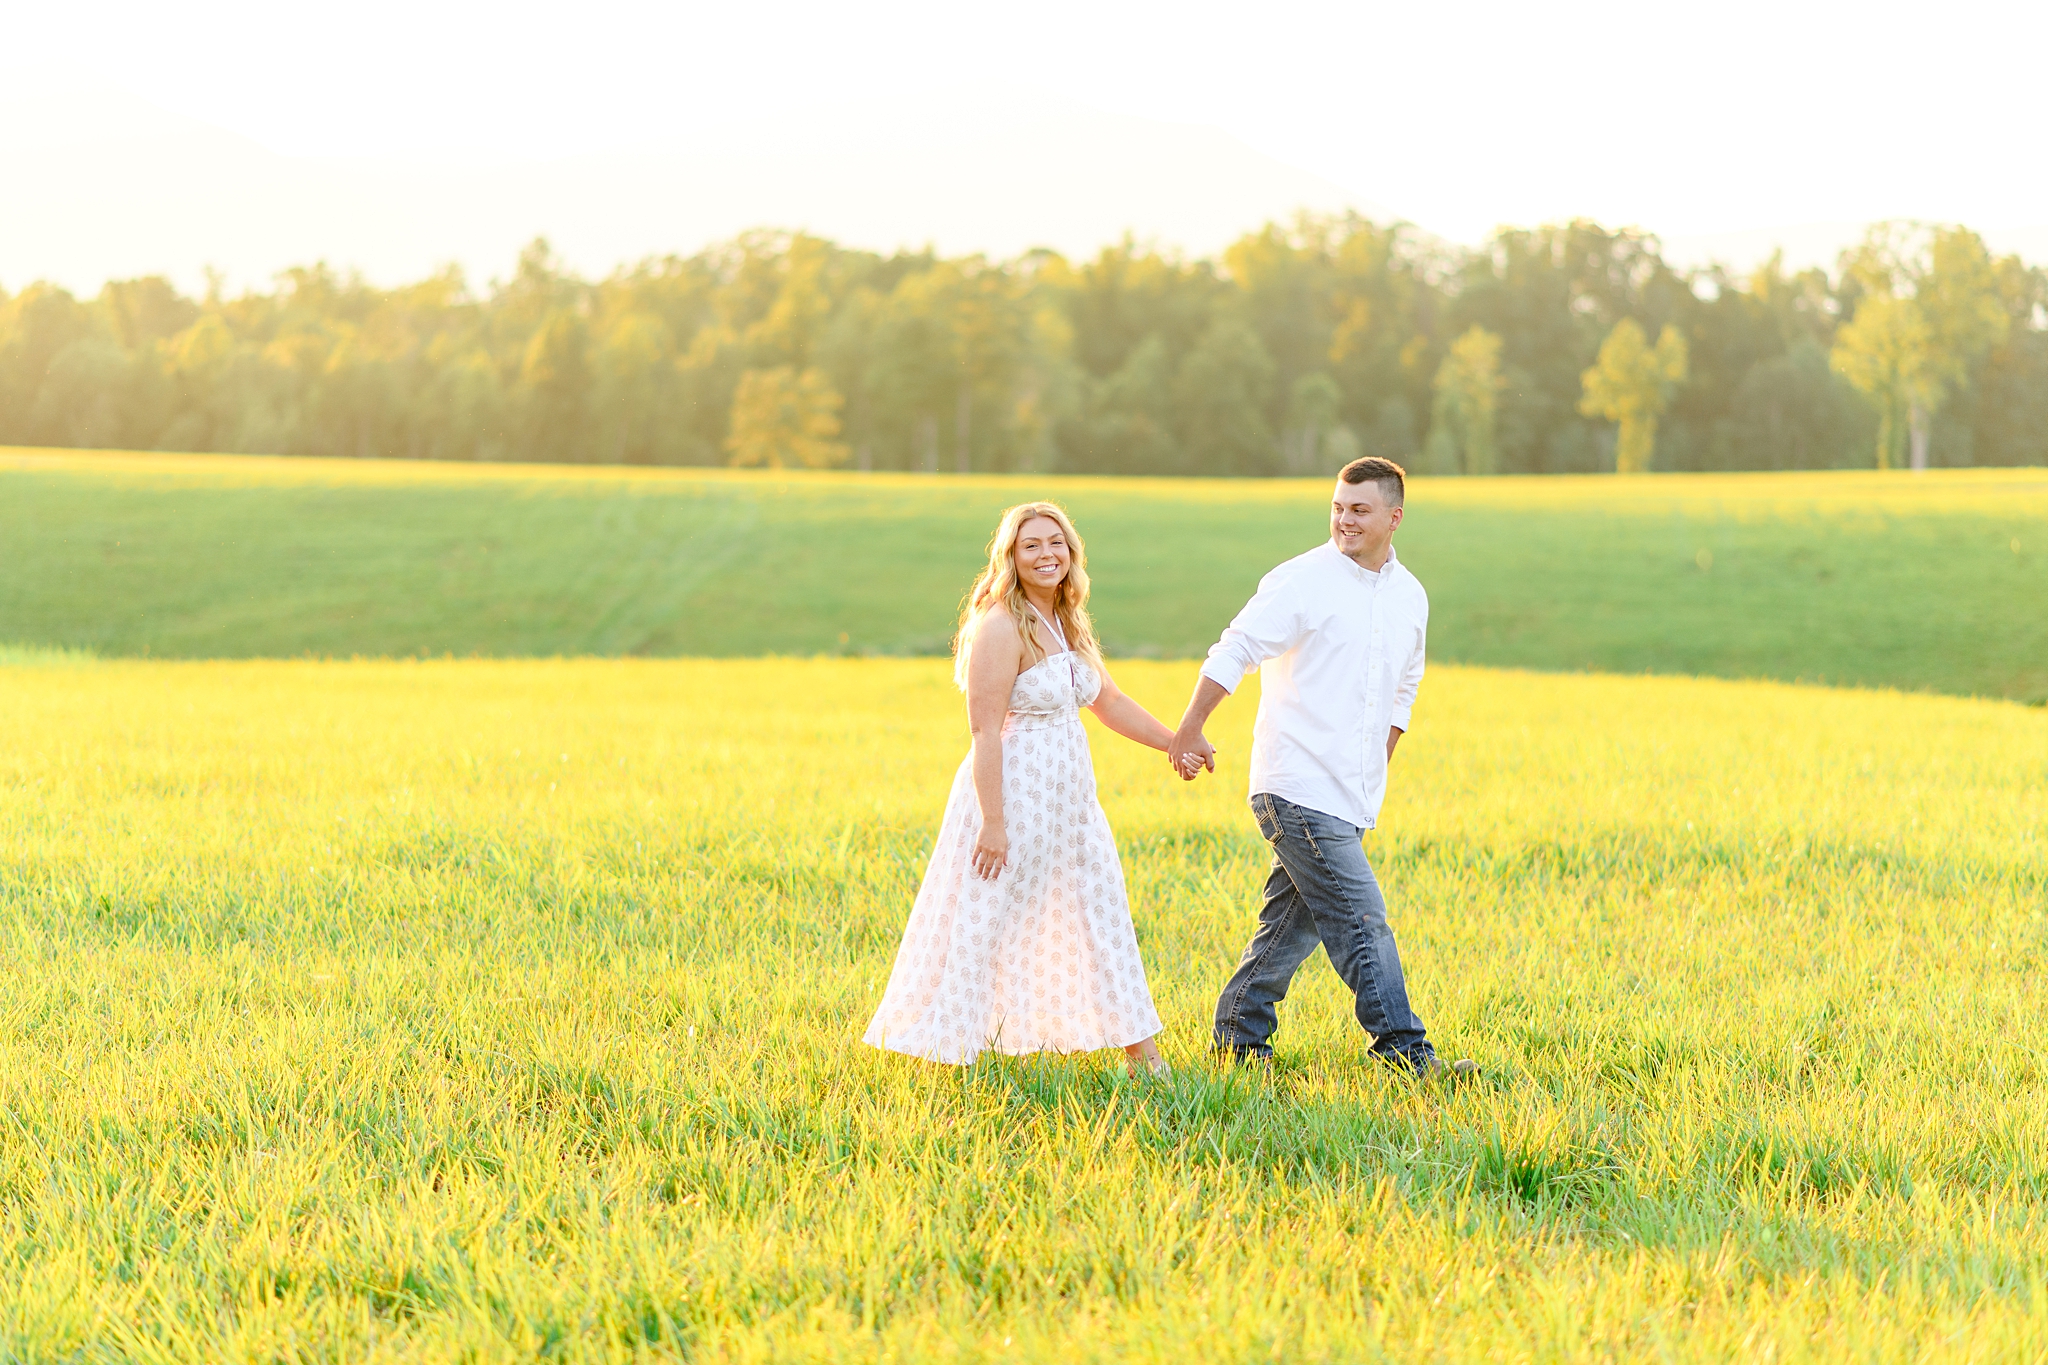 newlyweds walking in the field at sunset